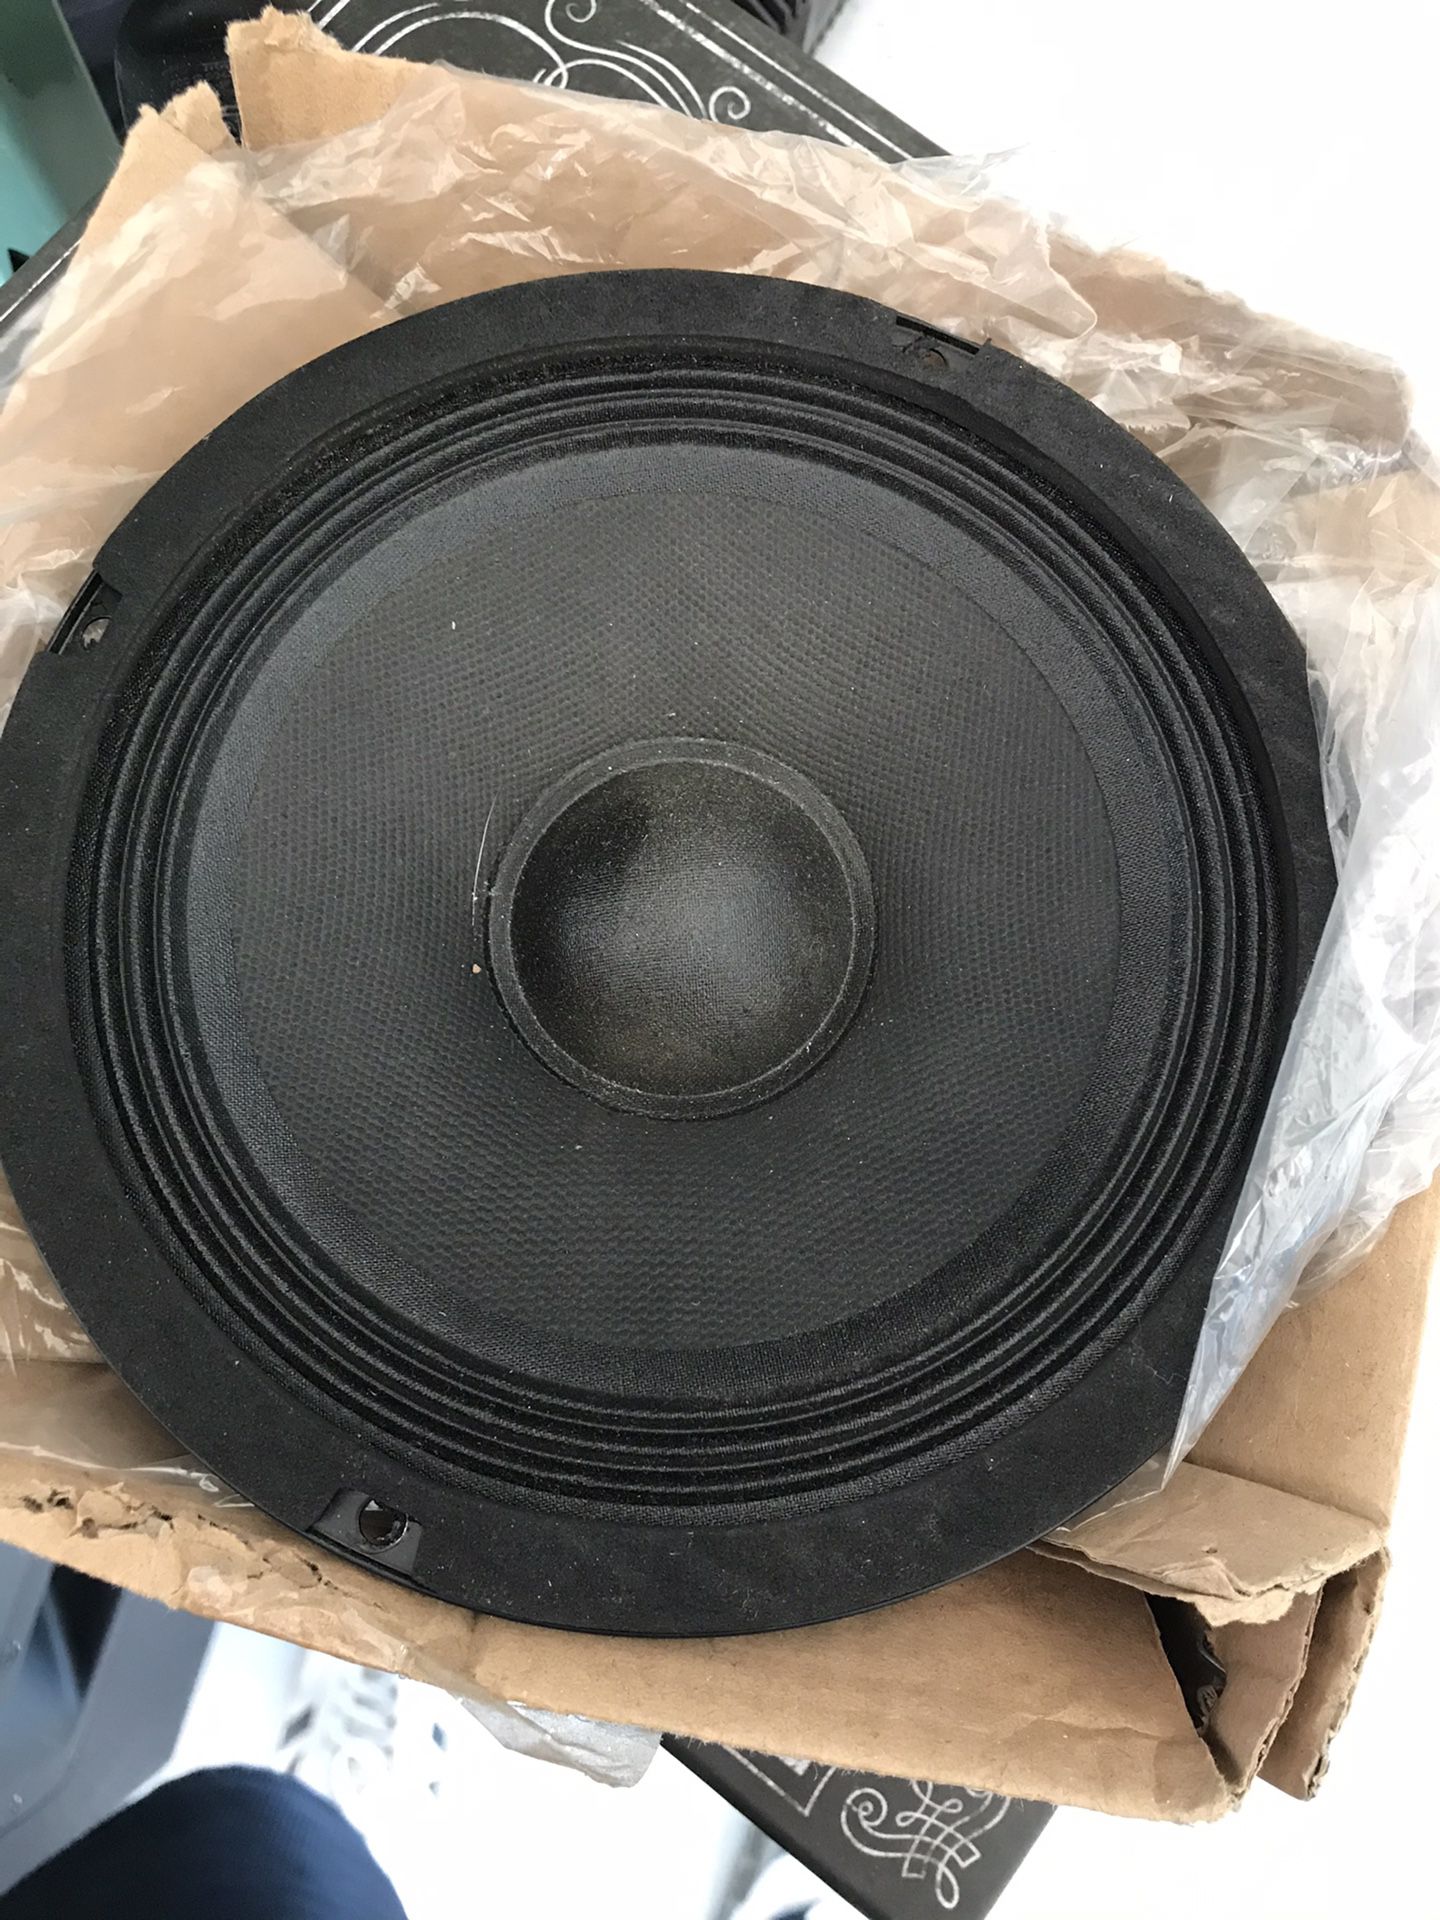 6” Carvin Professional Audio replacement speaker for Home or DJ